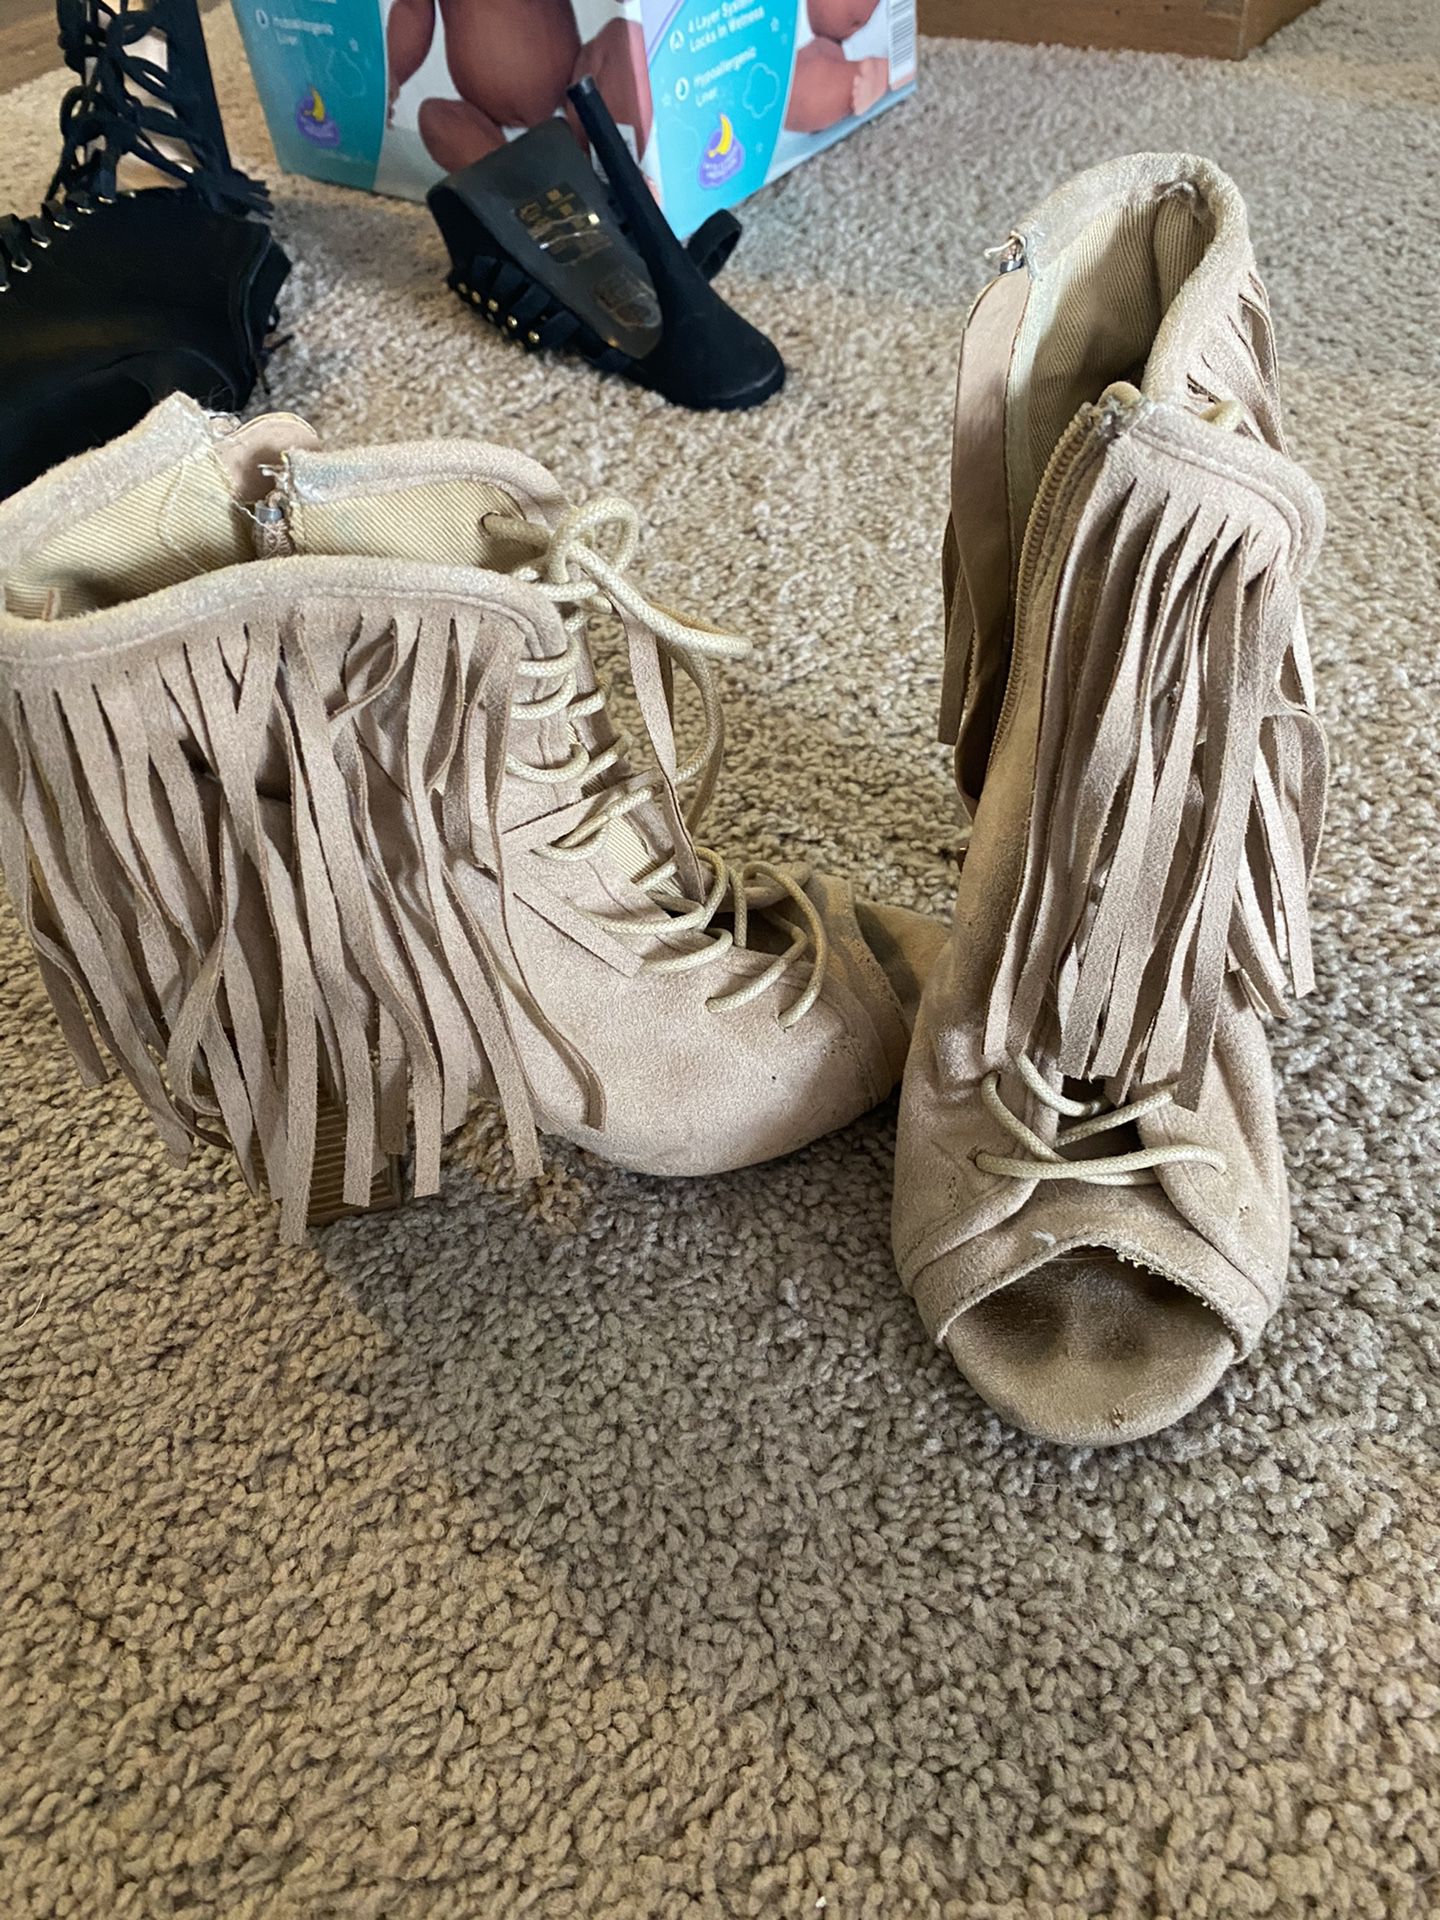 Heel booties with fringe (need some cleaning)